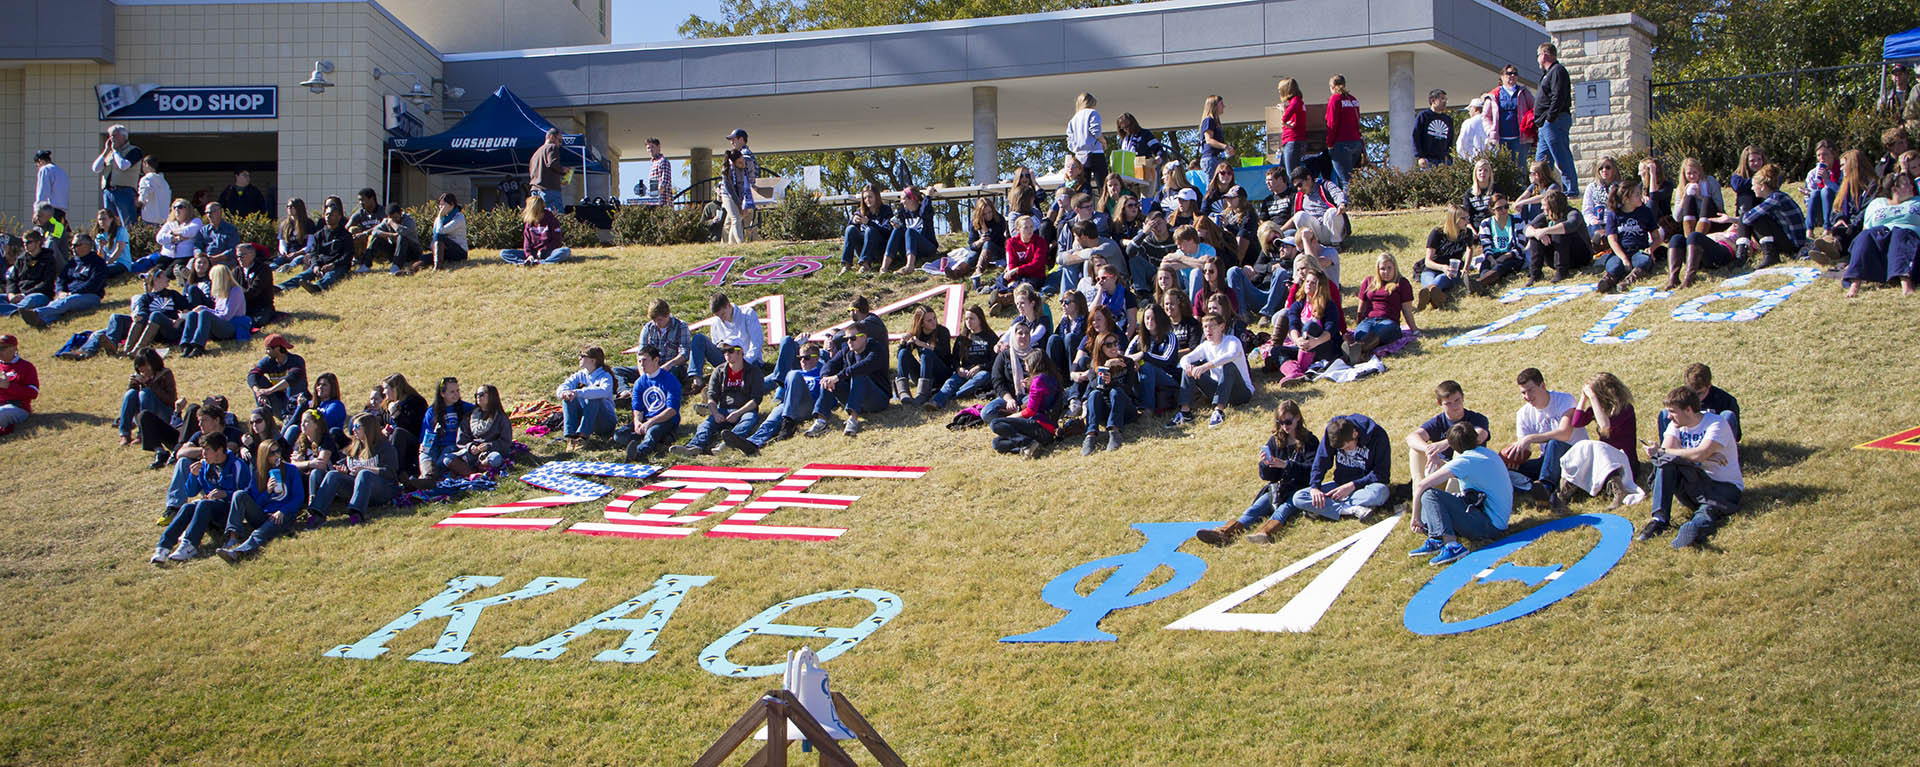 Students with their fraternity and sorority letters sit on the hill to watch the football game.